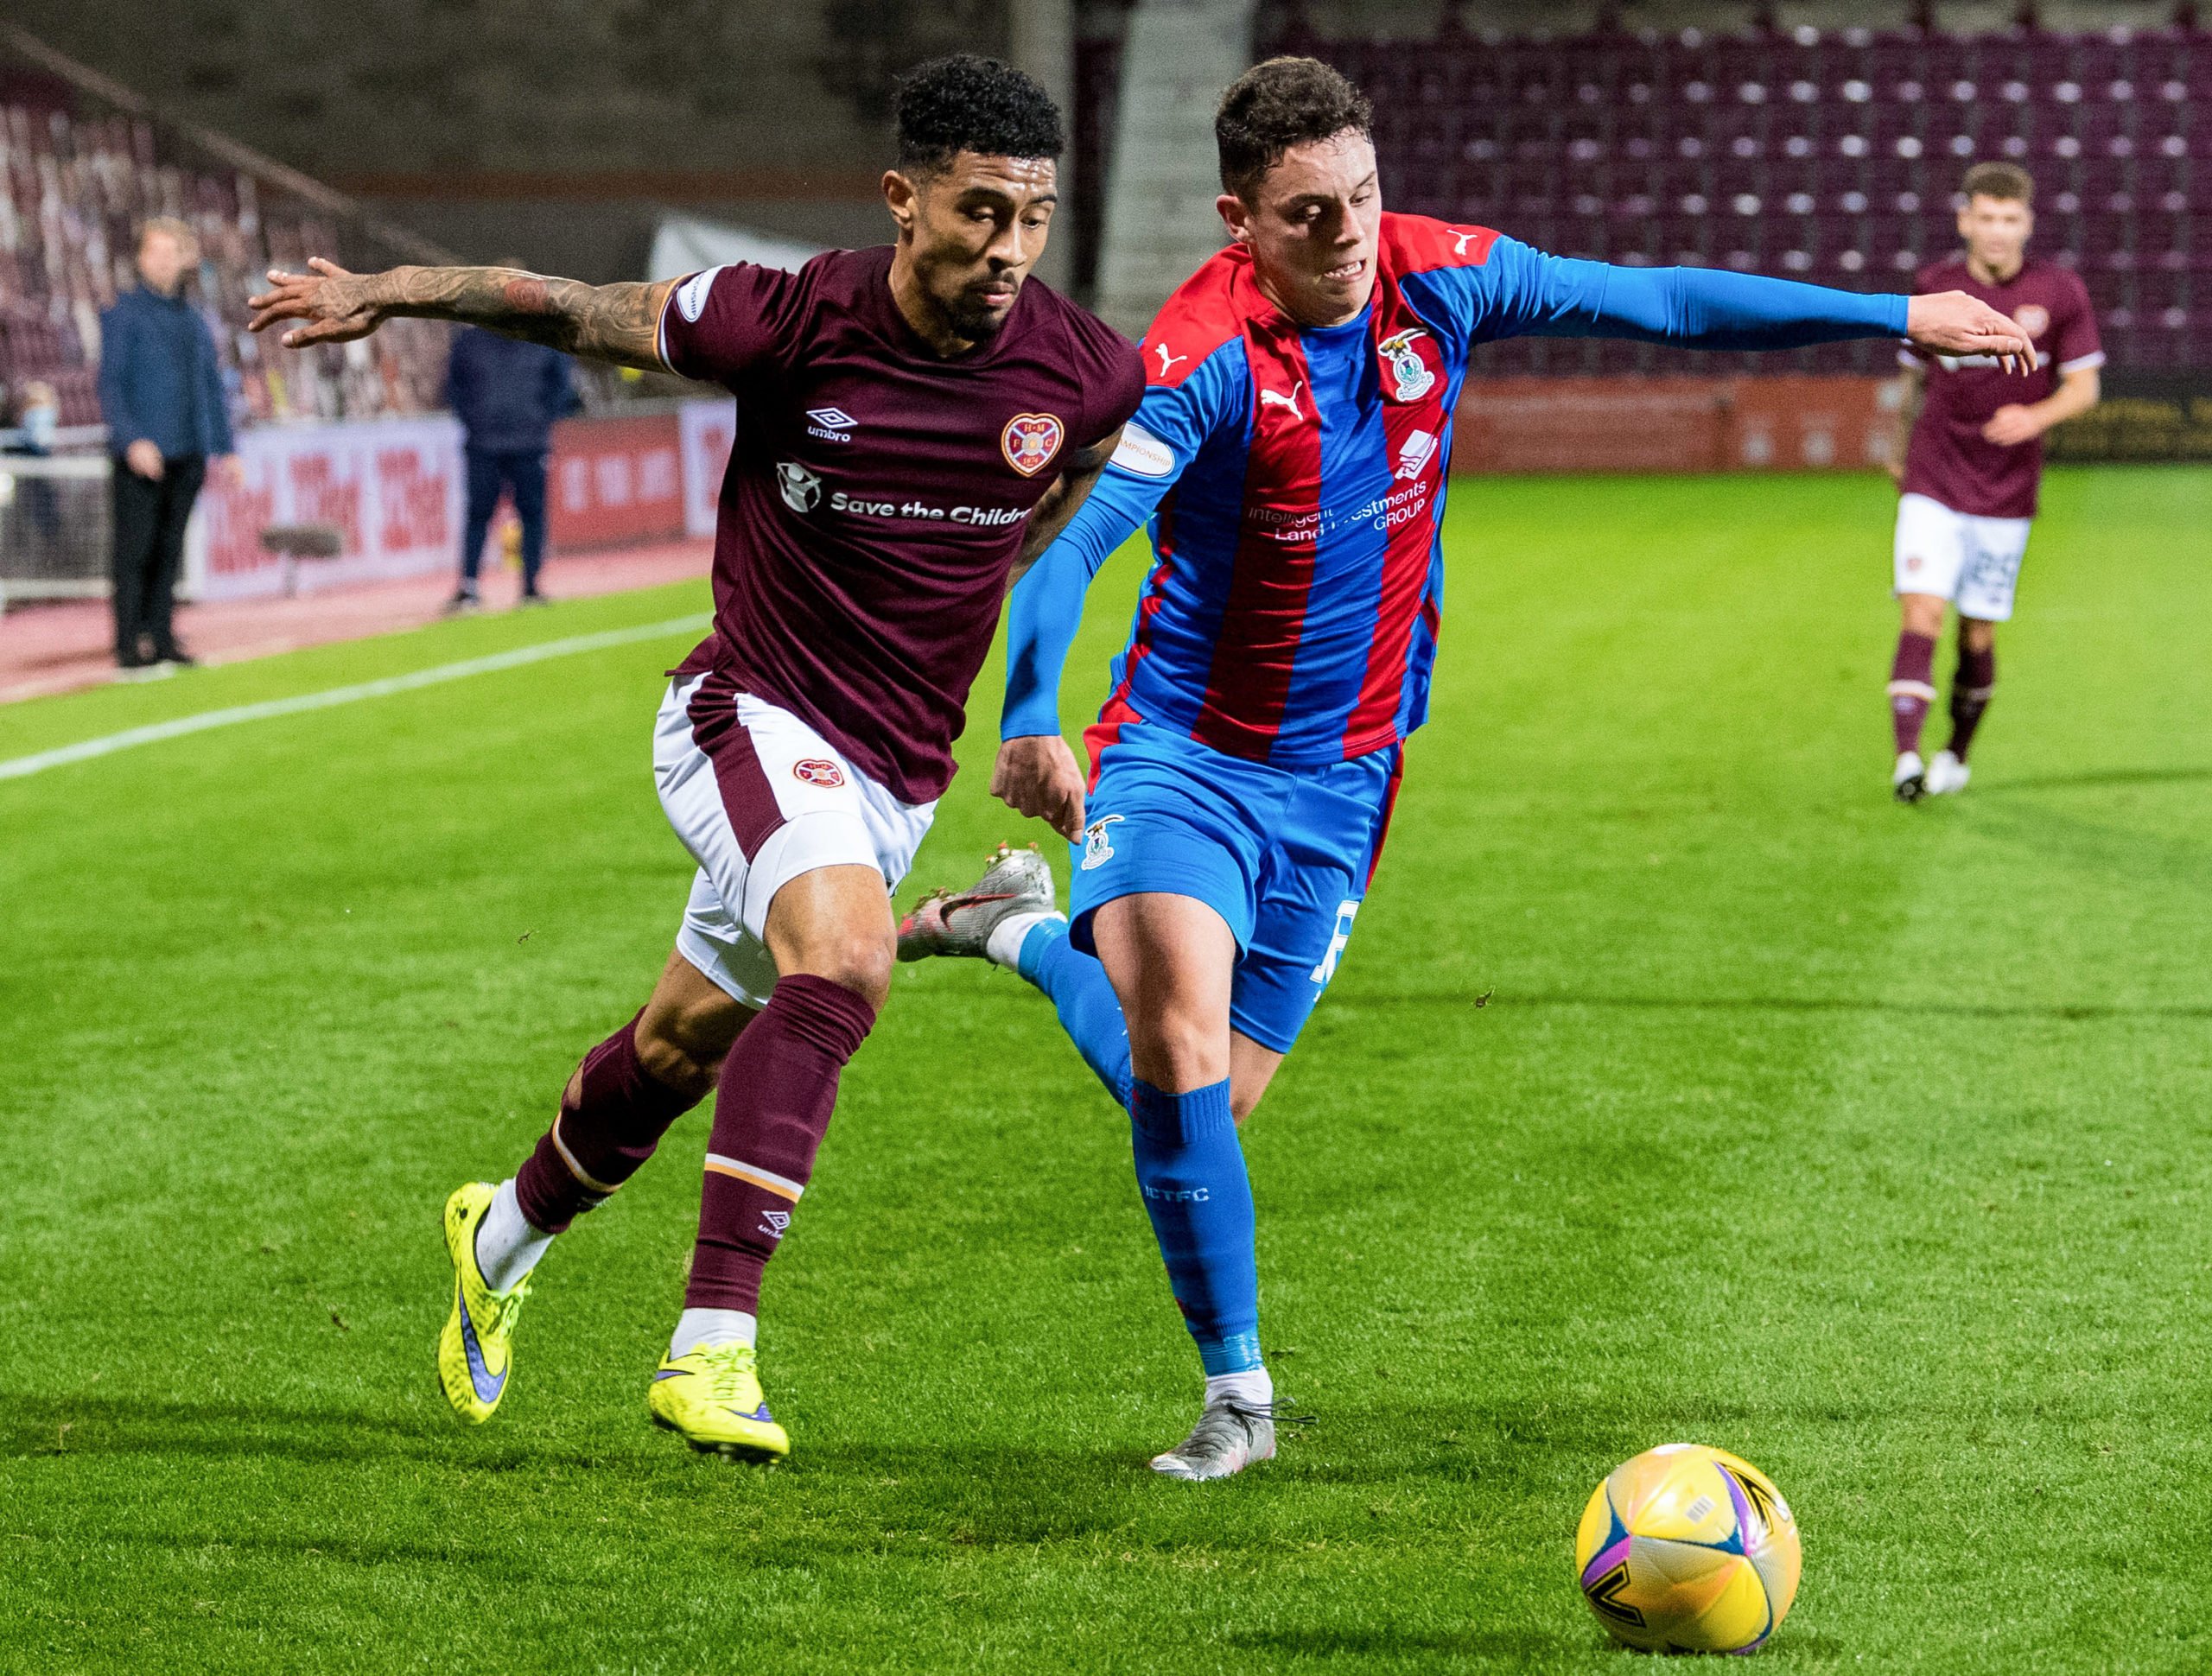 Heart of Midlothian v Inverness Caledonian Thistle - Betfred Cup Match